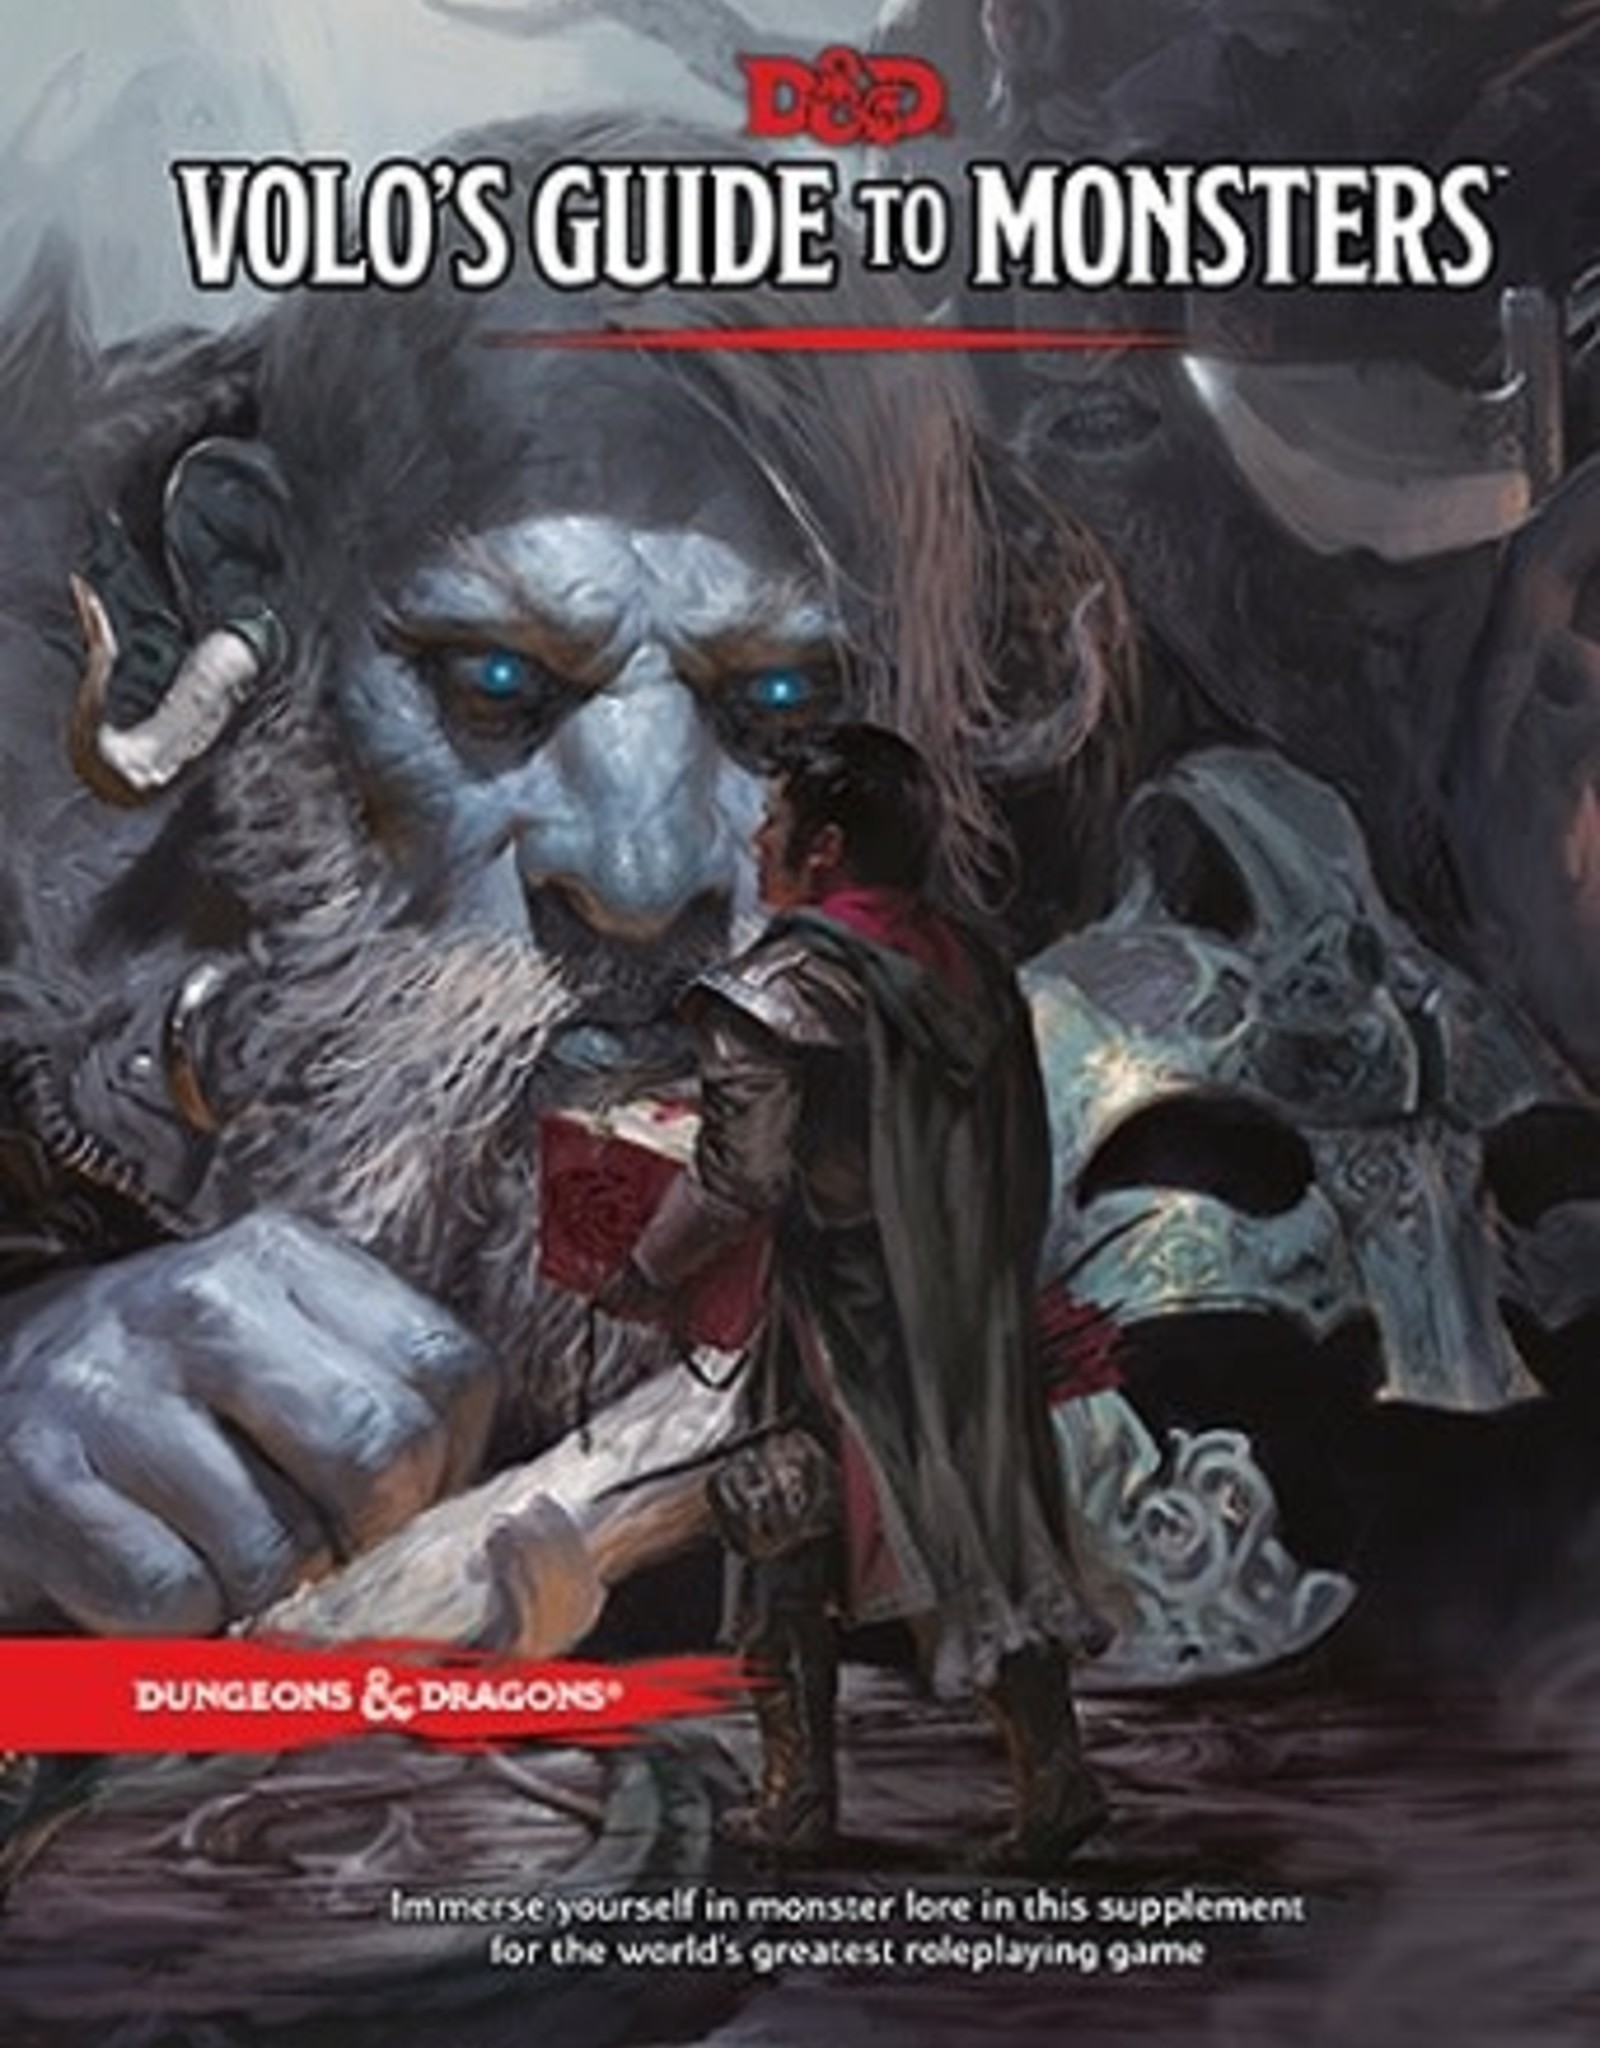 Wizards of the Coast DND RPG VOLO'S GUIDE TO MONSTERS